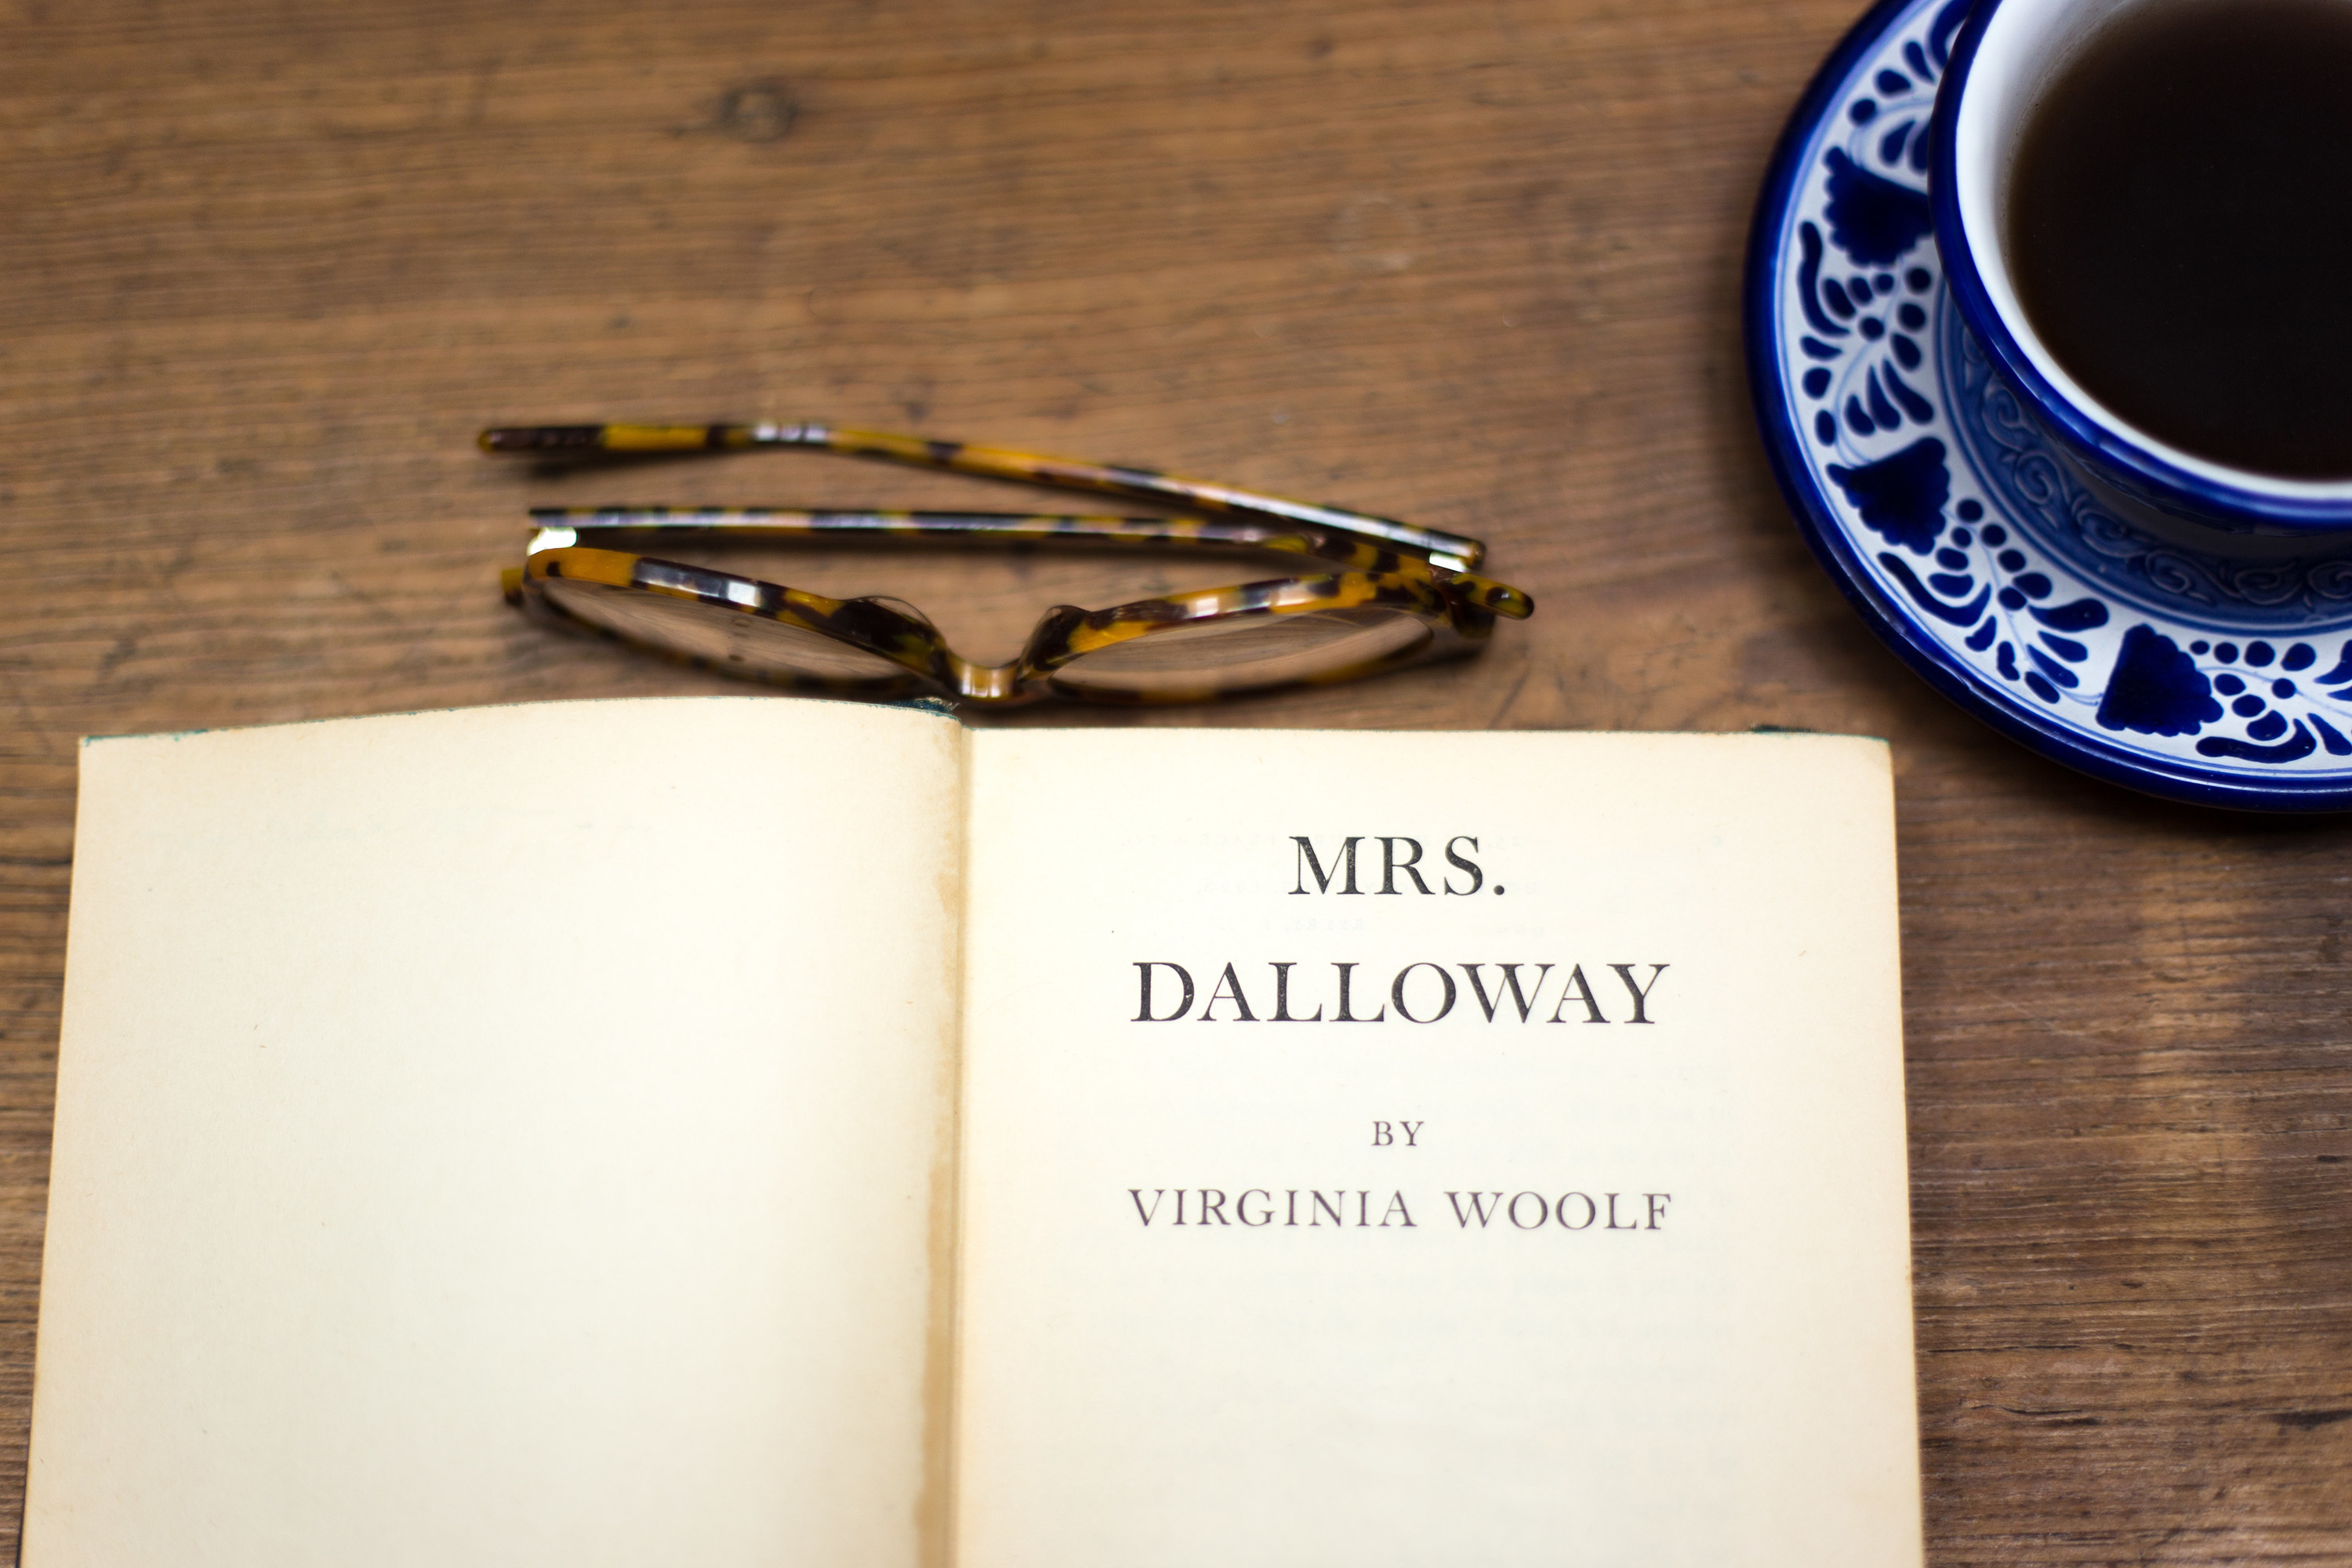 Book opened to the title page of Mrs. Dalloway by Virginia Woolf